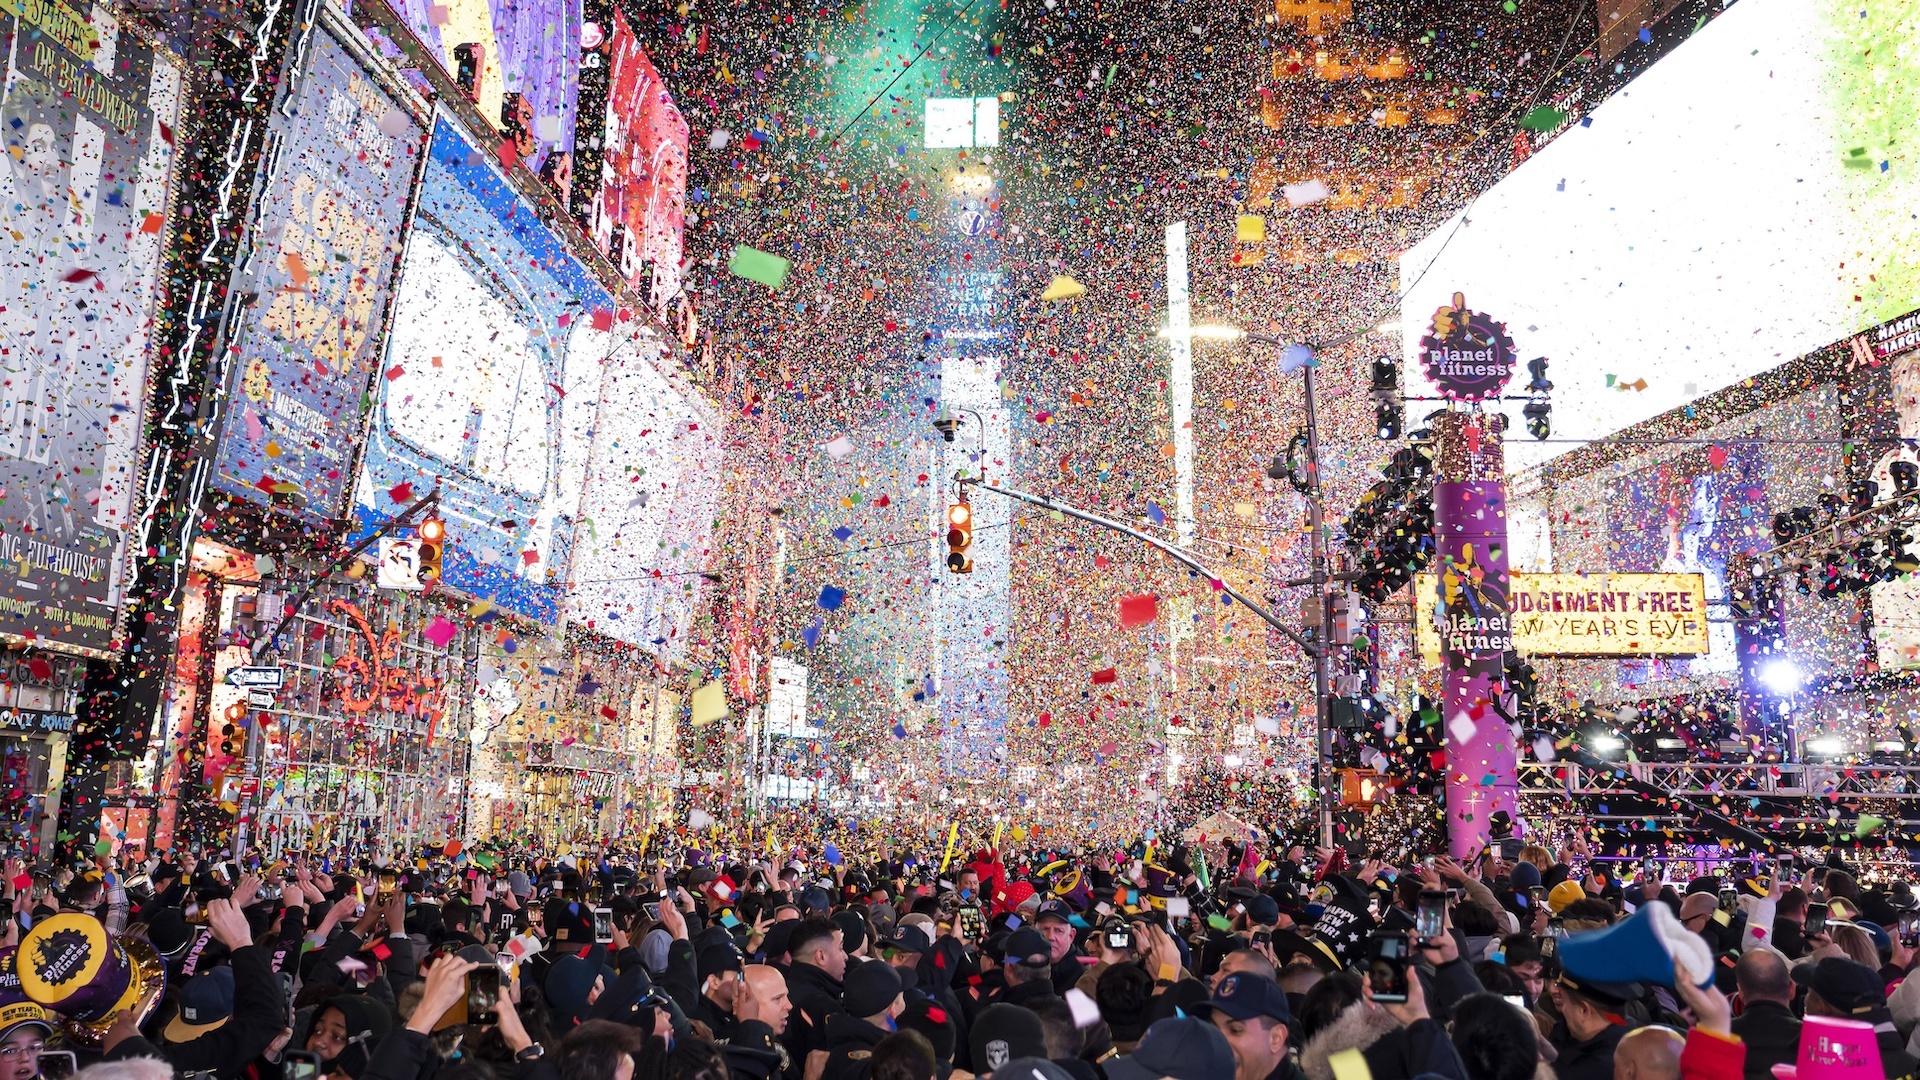 In this Jan. 1, 2020, file photo, confetti falls at midnight on the Times Square New Year's Eve celebration in New York. If ever a year's end seemed like cause for celebration, 2020 might be it. (Photo by Ben Hider/Invision/AP, File)